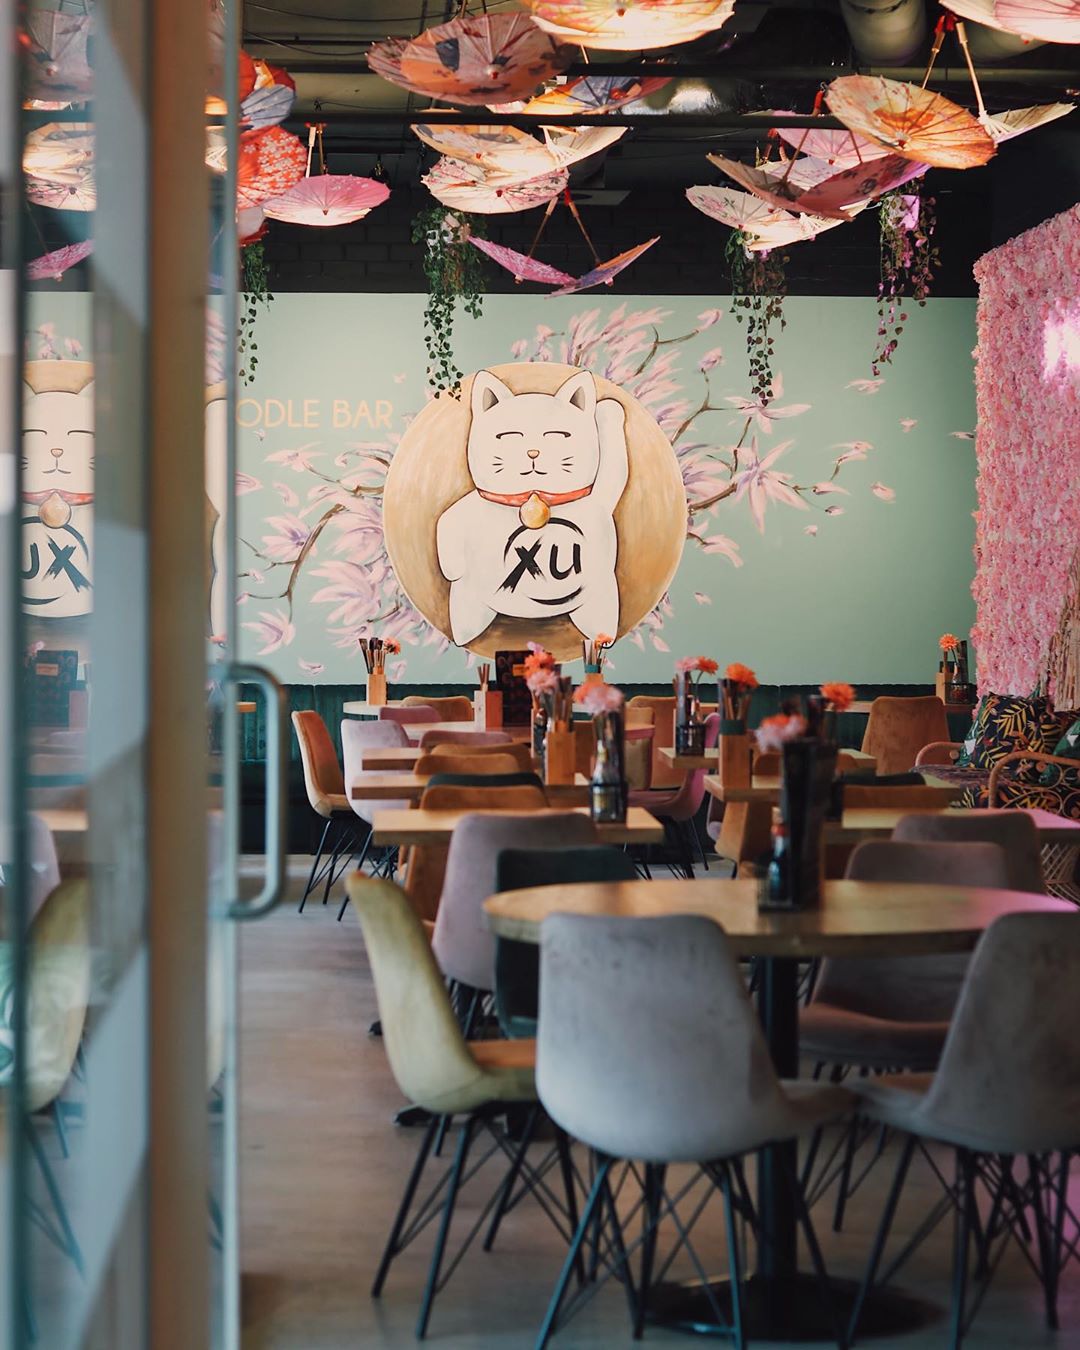 Hello there! Have you seen our giant lucky cat on the wall? ? .
.
.
.
.
.
#XuNoodleBar #Tilburg #Tillie #Noodles #Asian #Chinese #Food #Homemade #Hotspot #FollowUs #SendNoods #LuckyCat #Waving